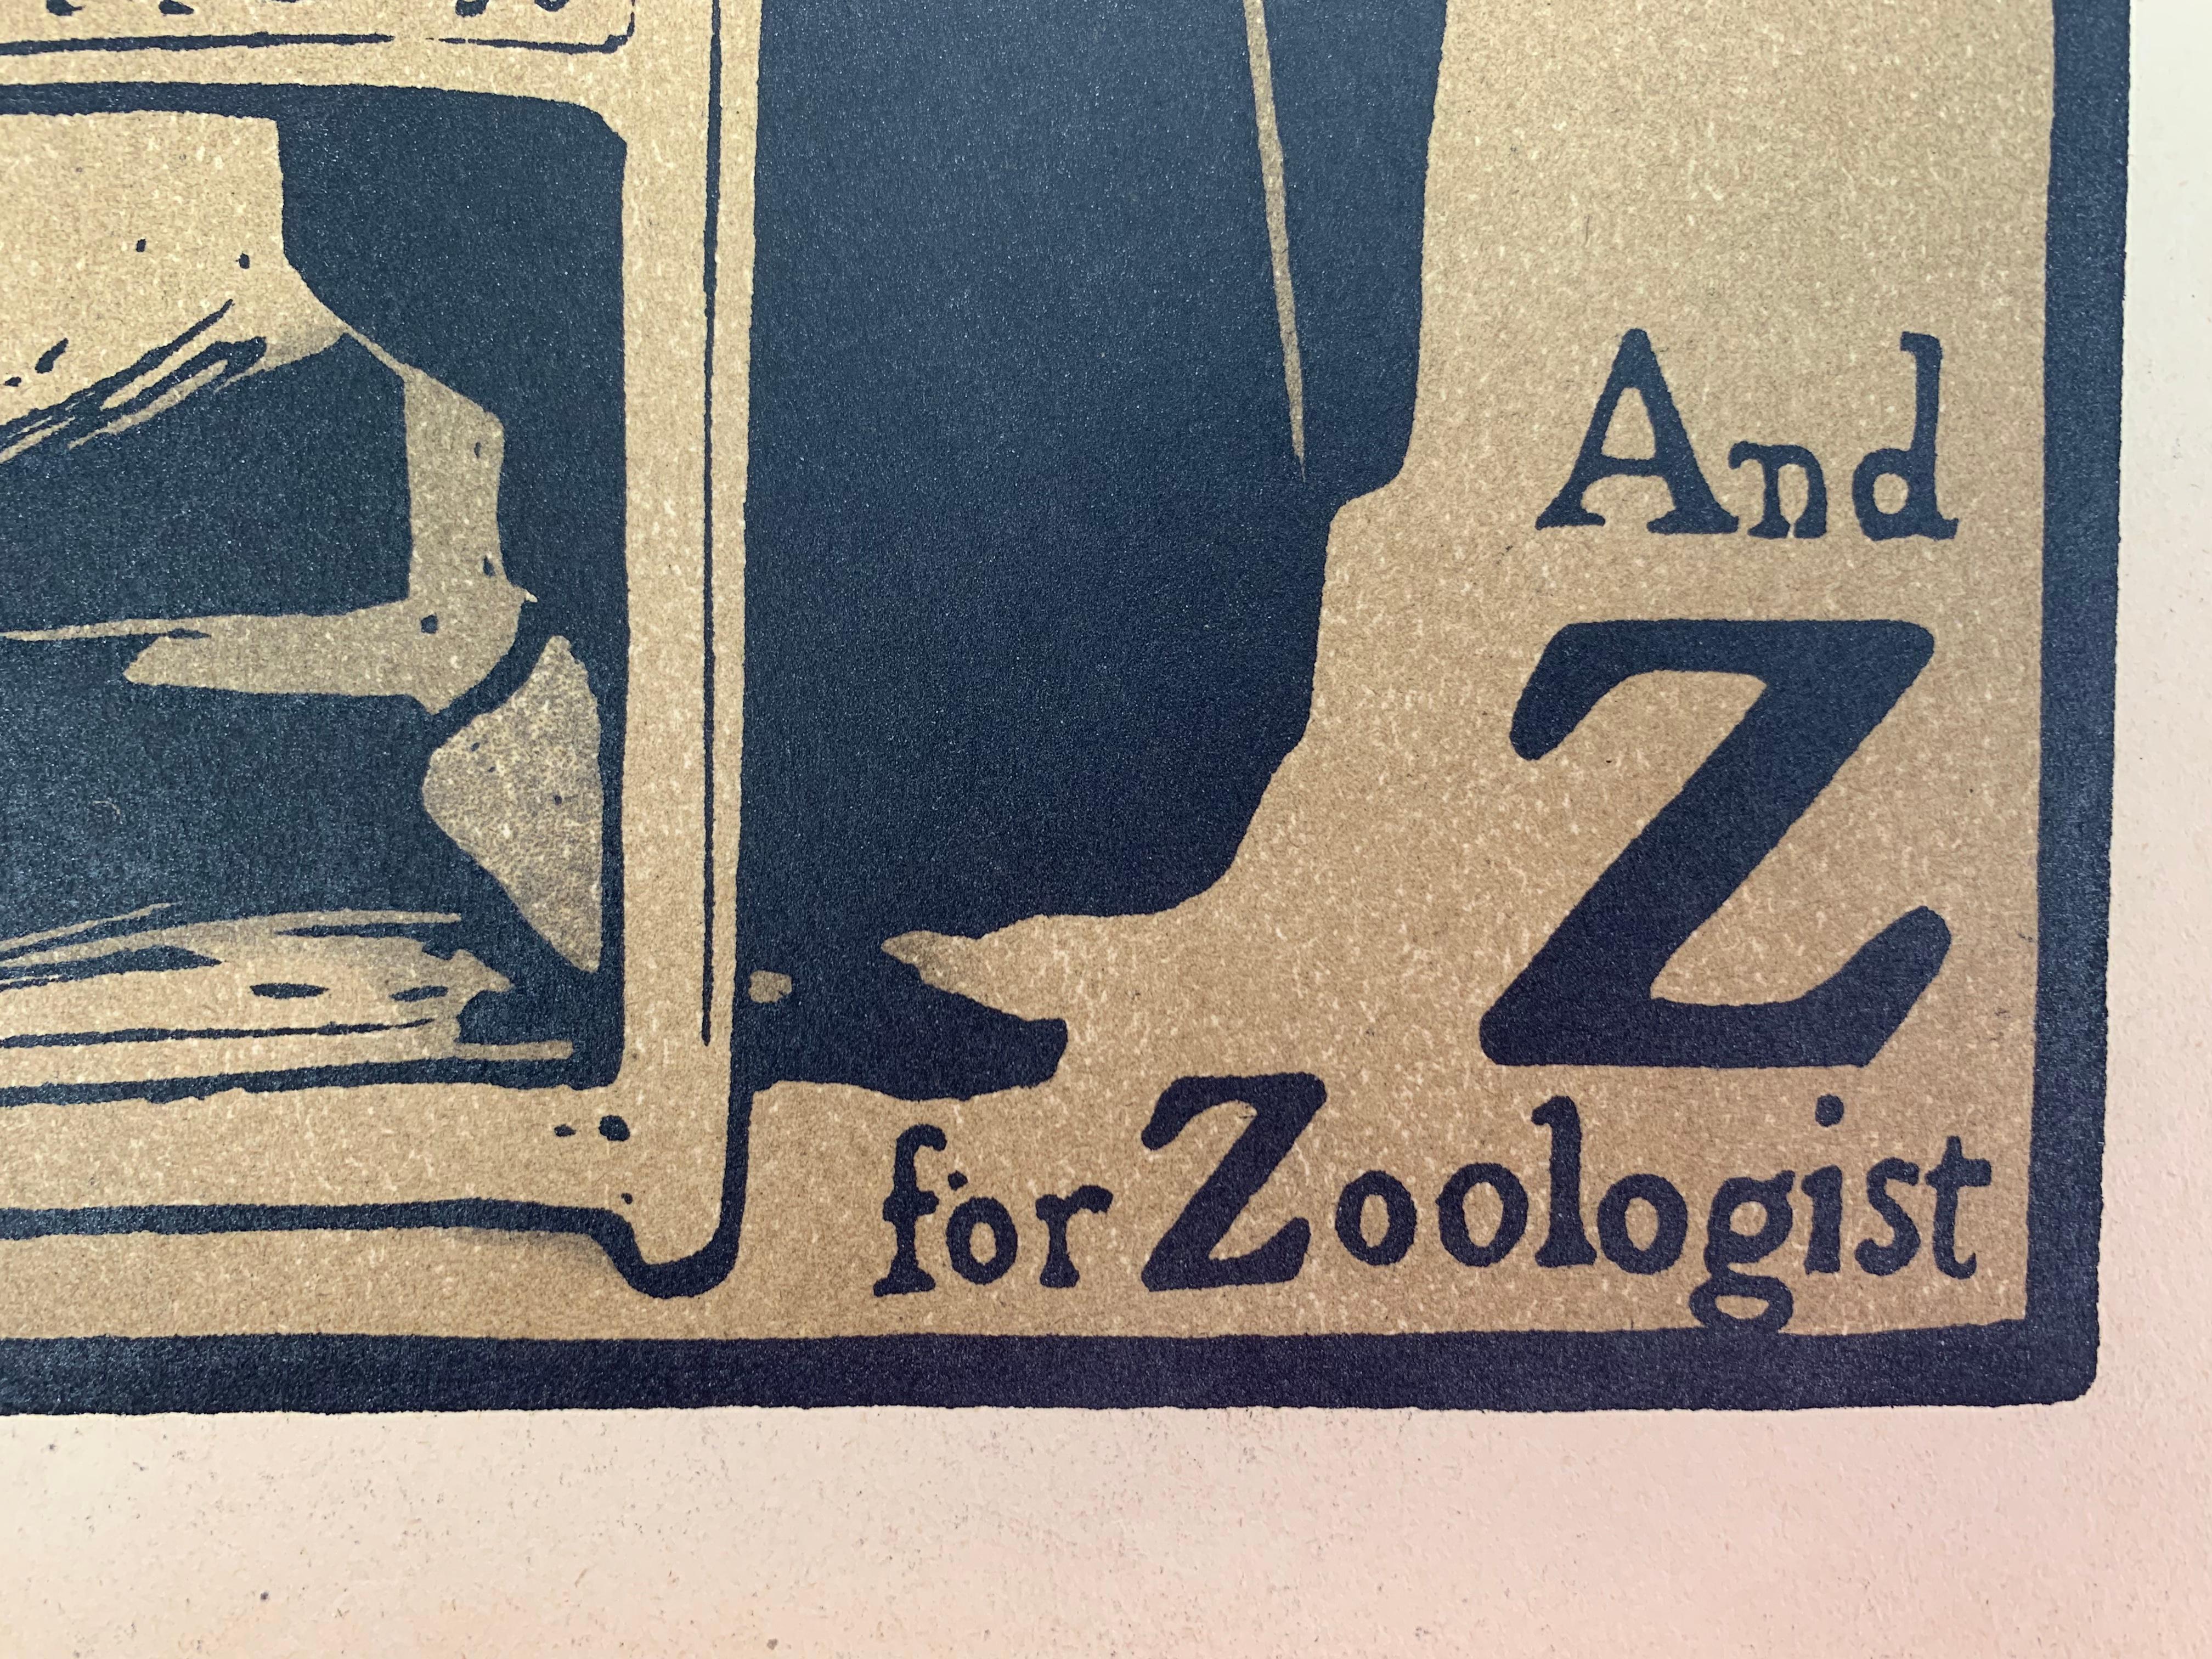 Victorian Z for Zoologist by William Nicholson from 